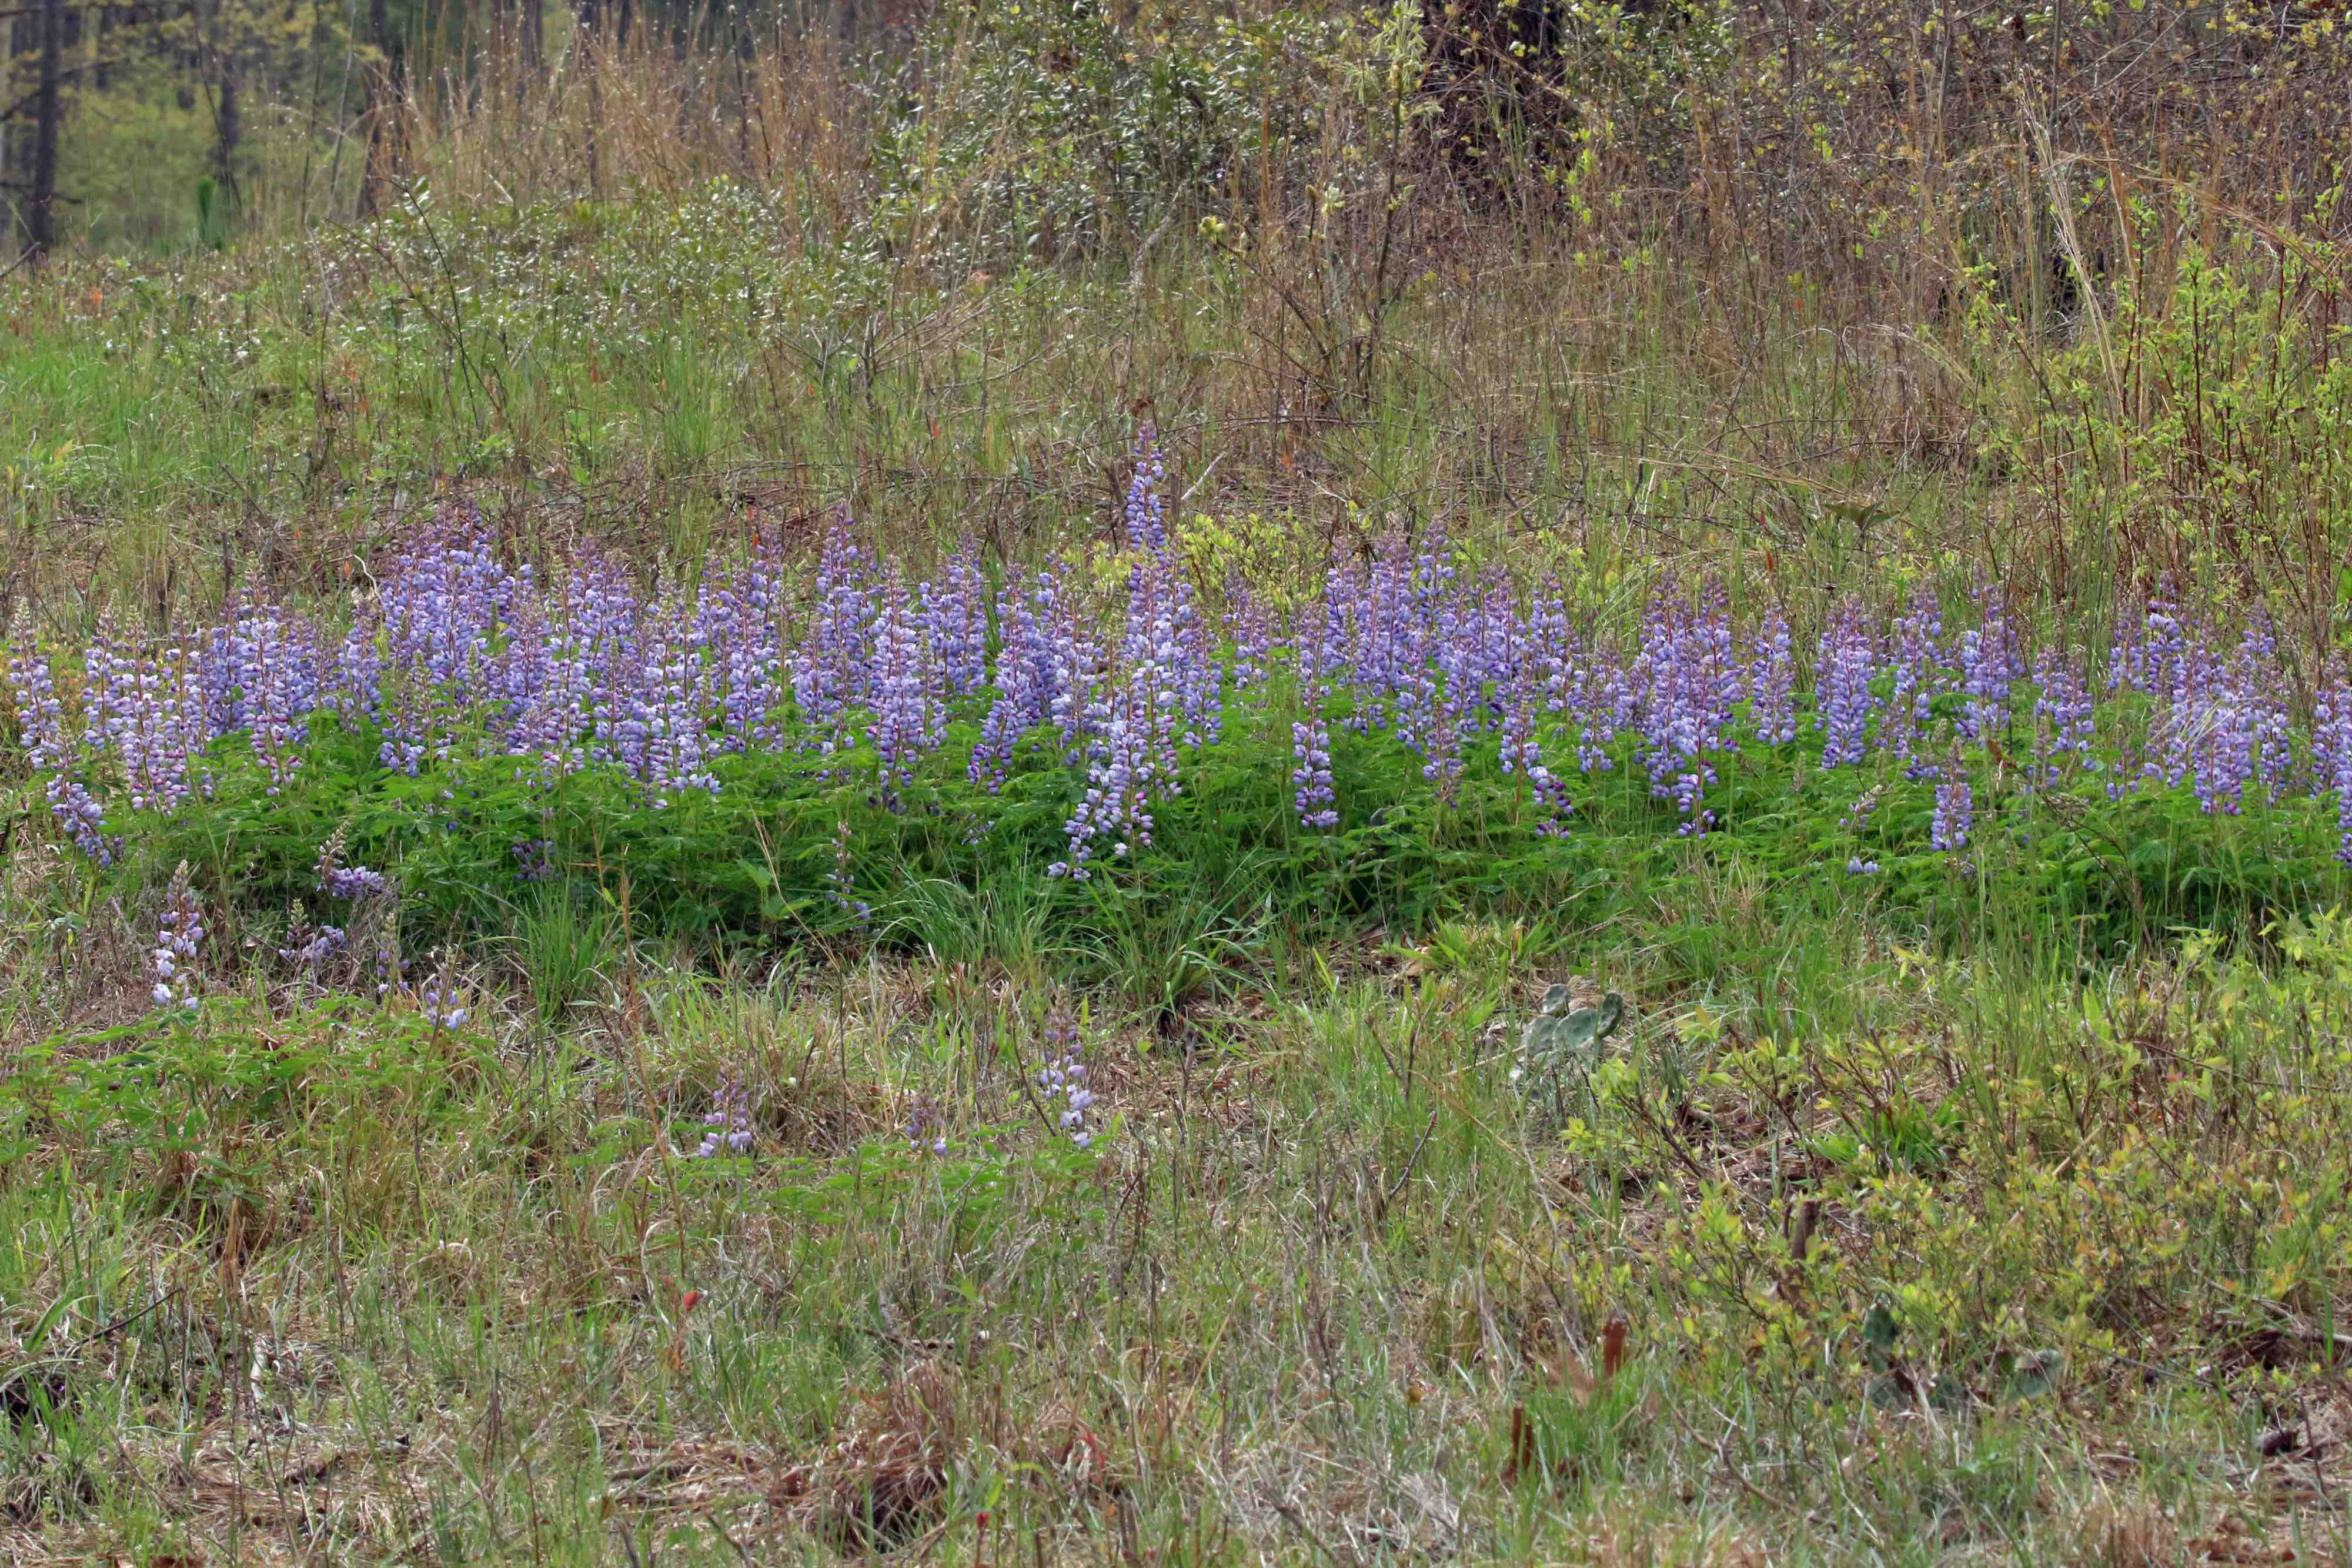 The Scientific Name is Lupinus perennis ssp. perennis. You will likely hear them called Northern Sundial Lupine. This picture shows the I found Lupinus perennis lining the sandy roadsides and dry margins of pine forests in the Chowan Swamp Game Lands. of Lupinus perennis ssp. perennis